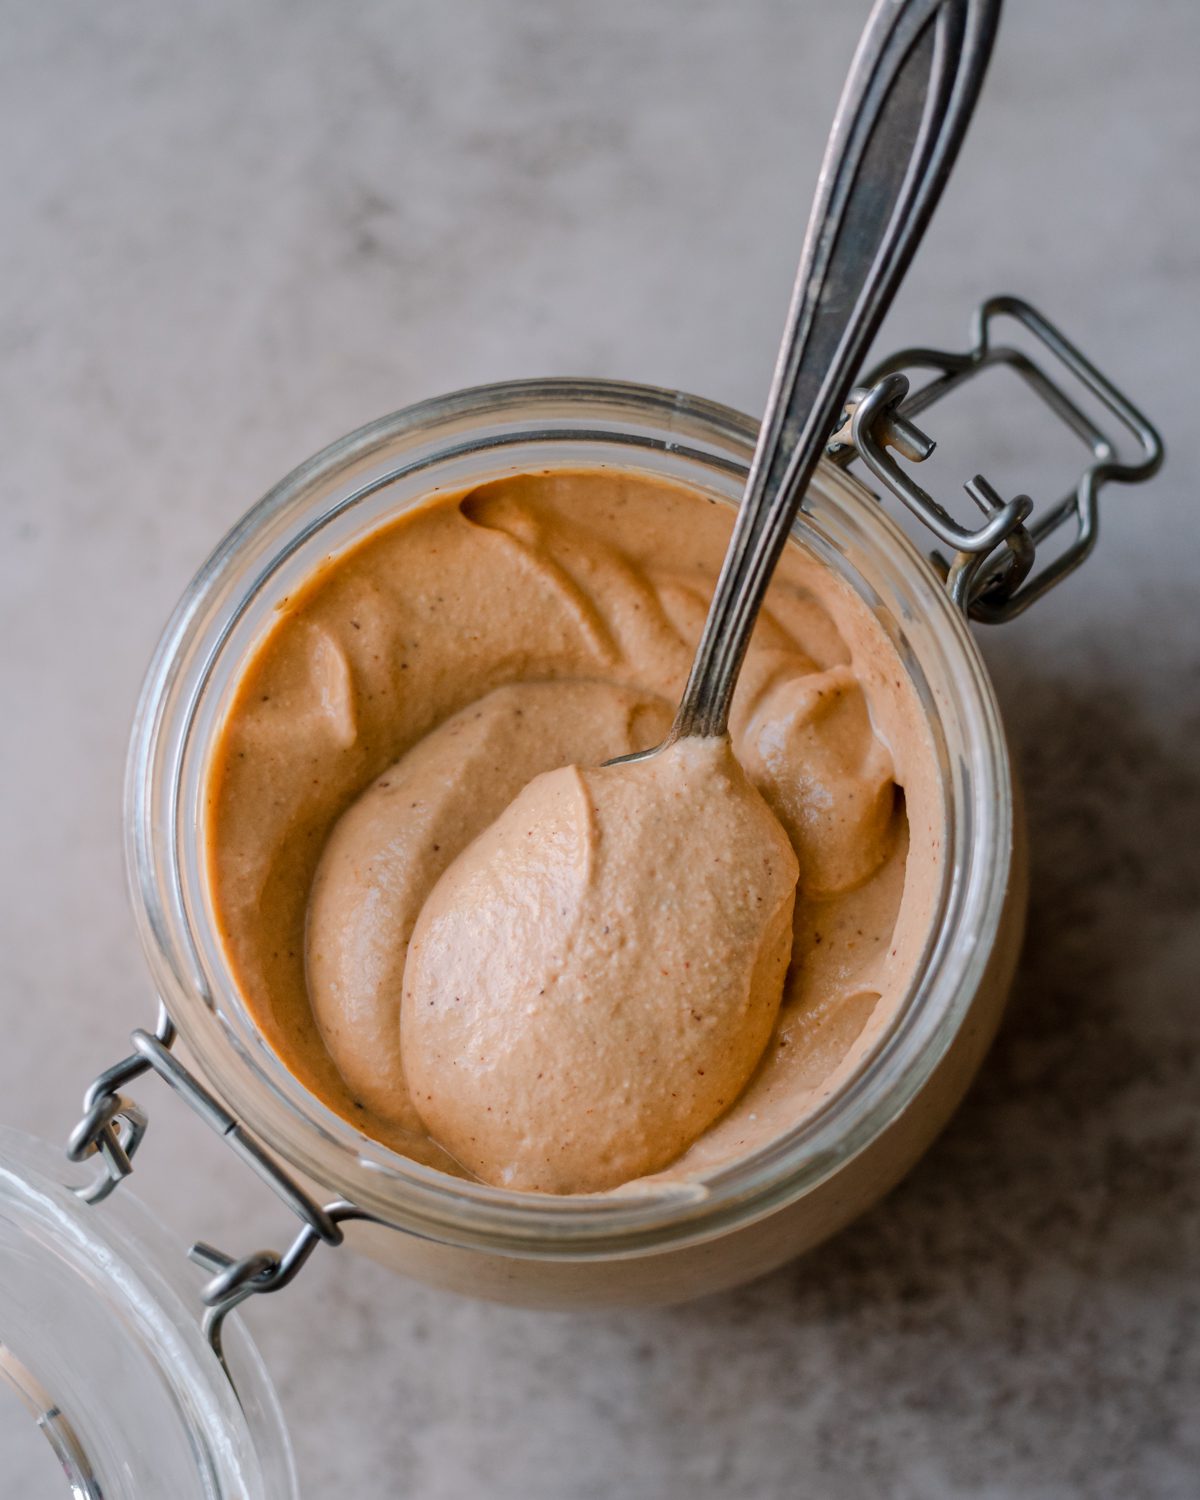 Spoon in a glass jar of queso.